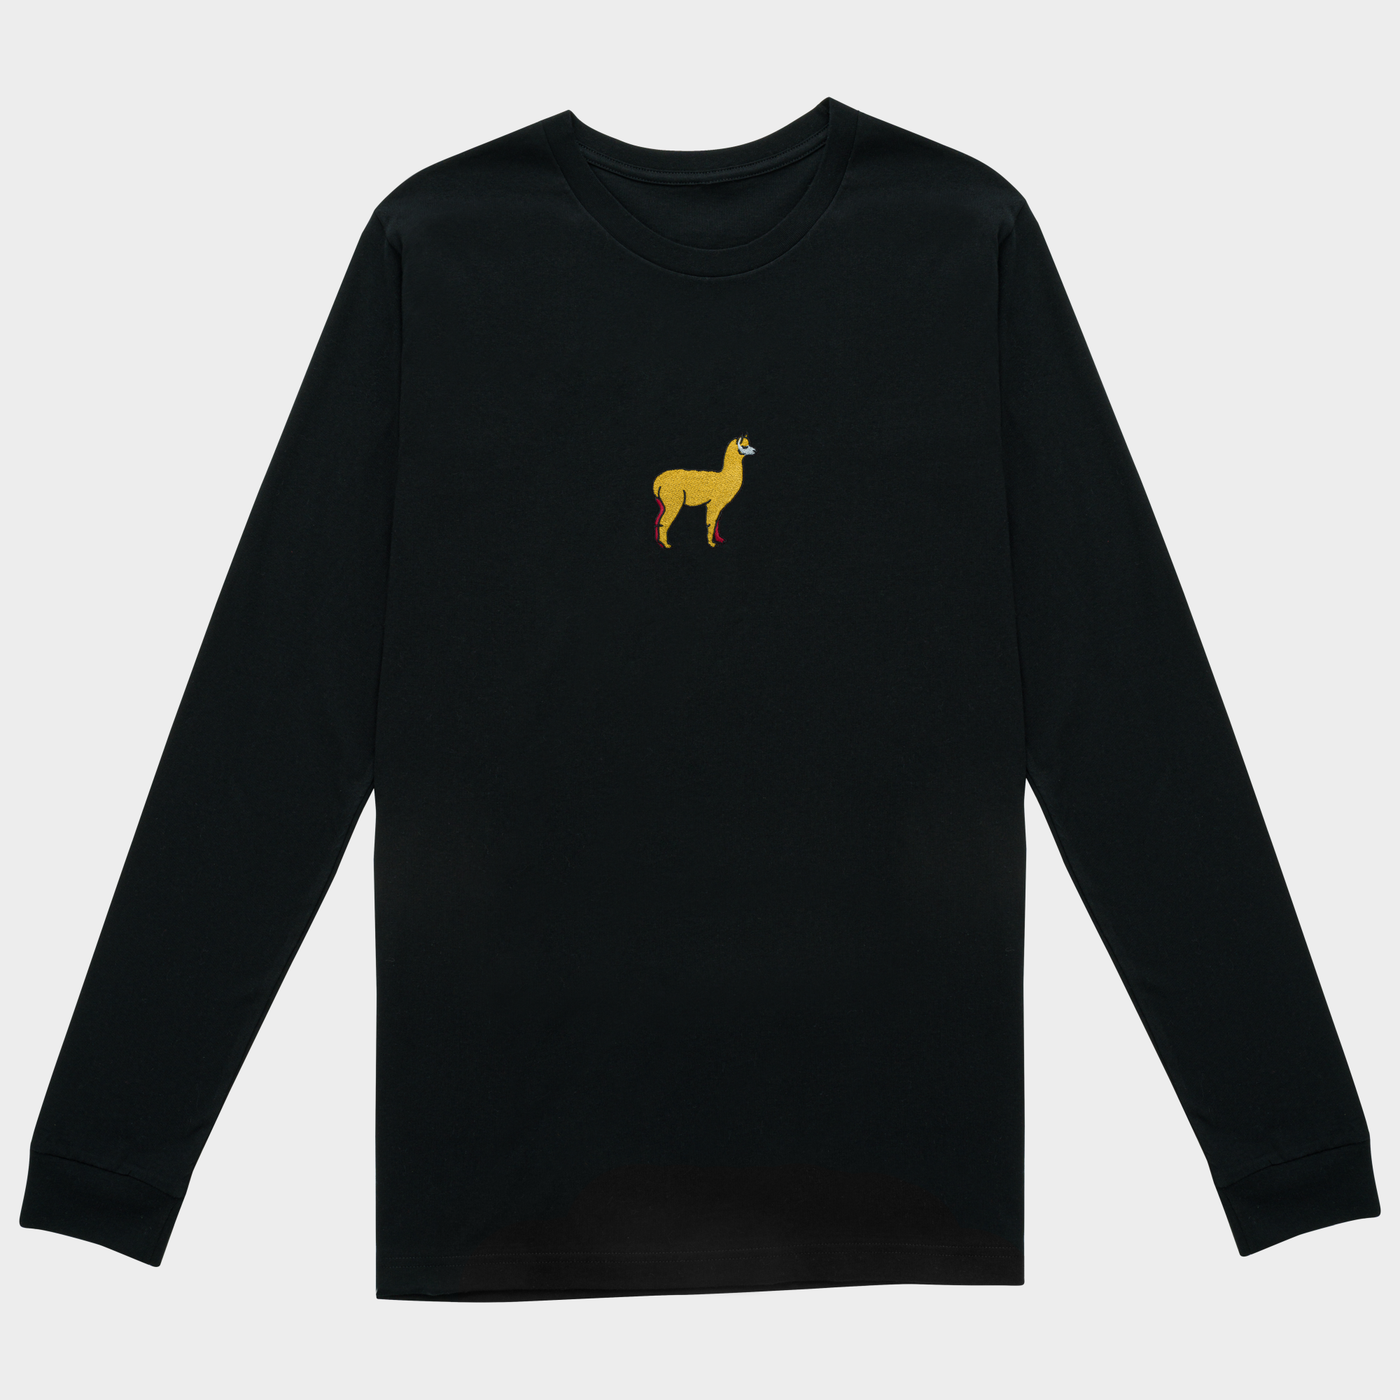 Bobby's Planet Men's Embroidered Alpaca Long Sleeve Shirt from South American Amazon Animals Collection in Black Color#color_black